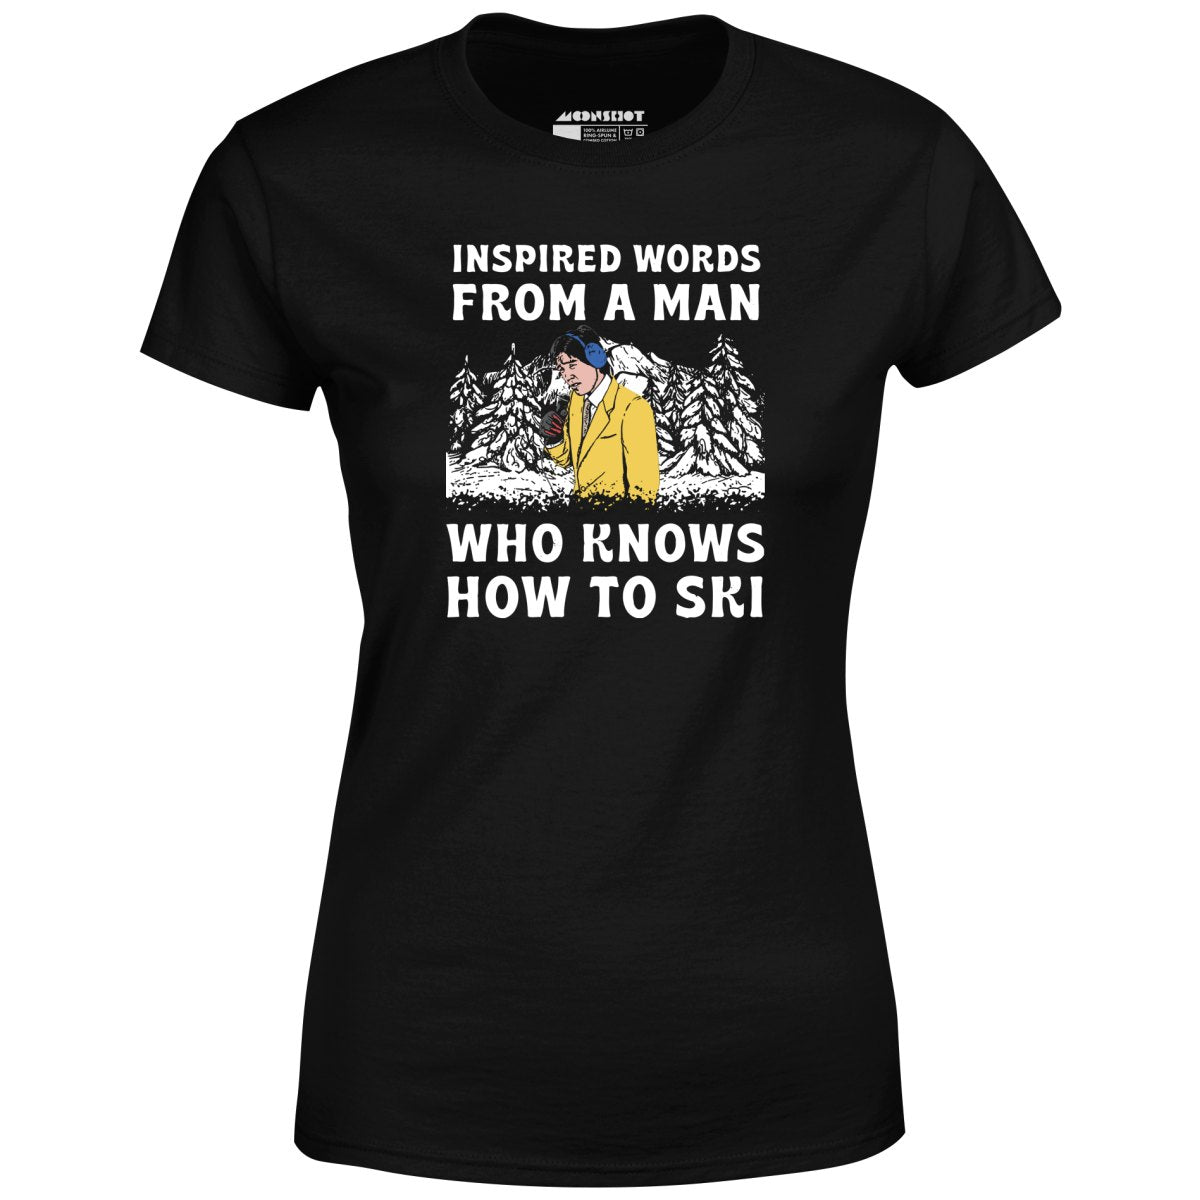 Inspired Words From a Man Who Knows How to Ski - Women's T-Shirt